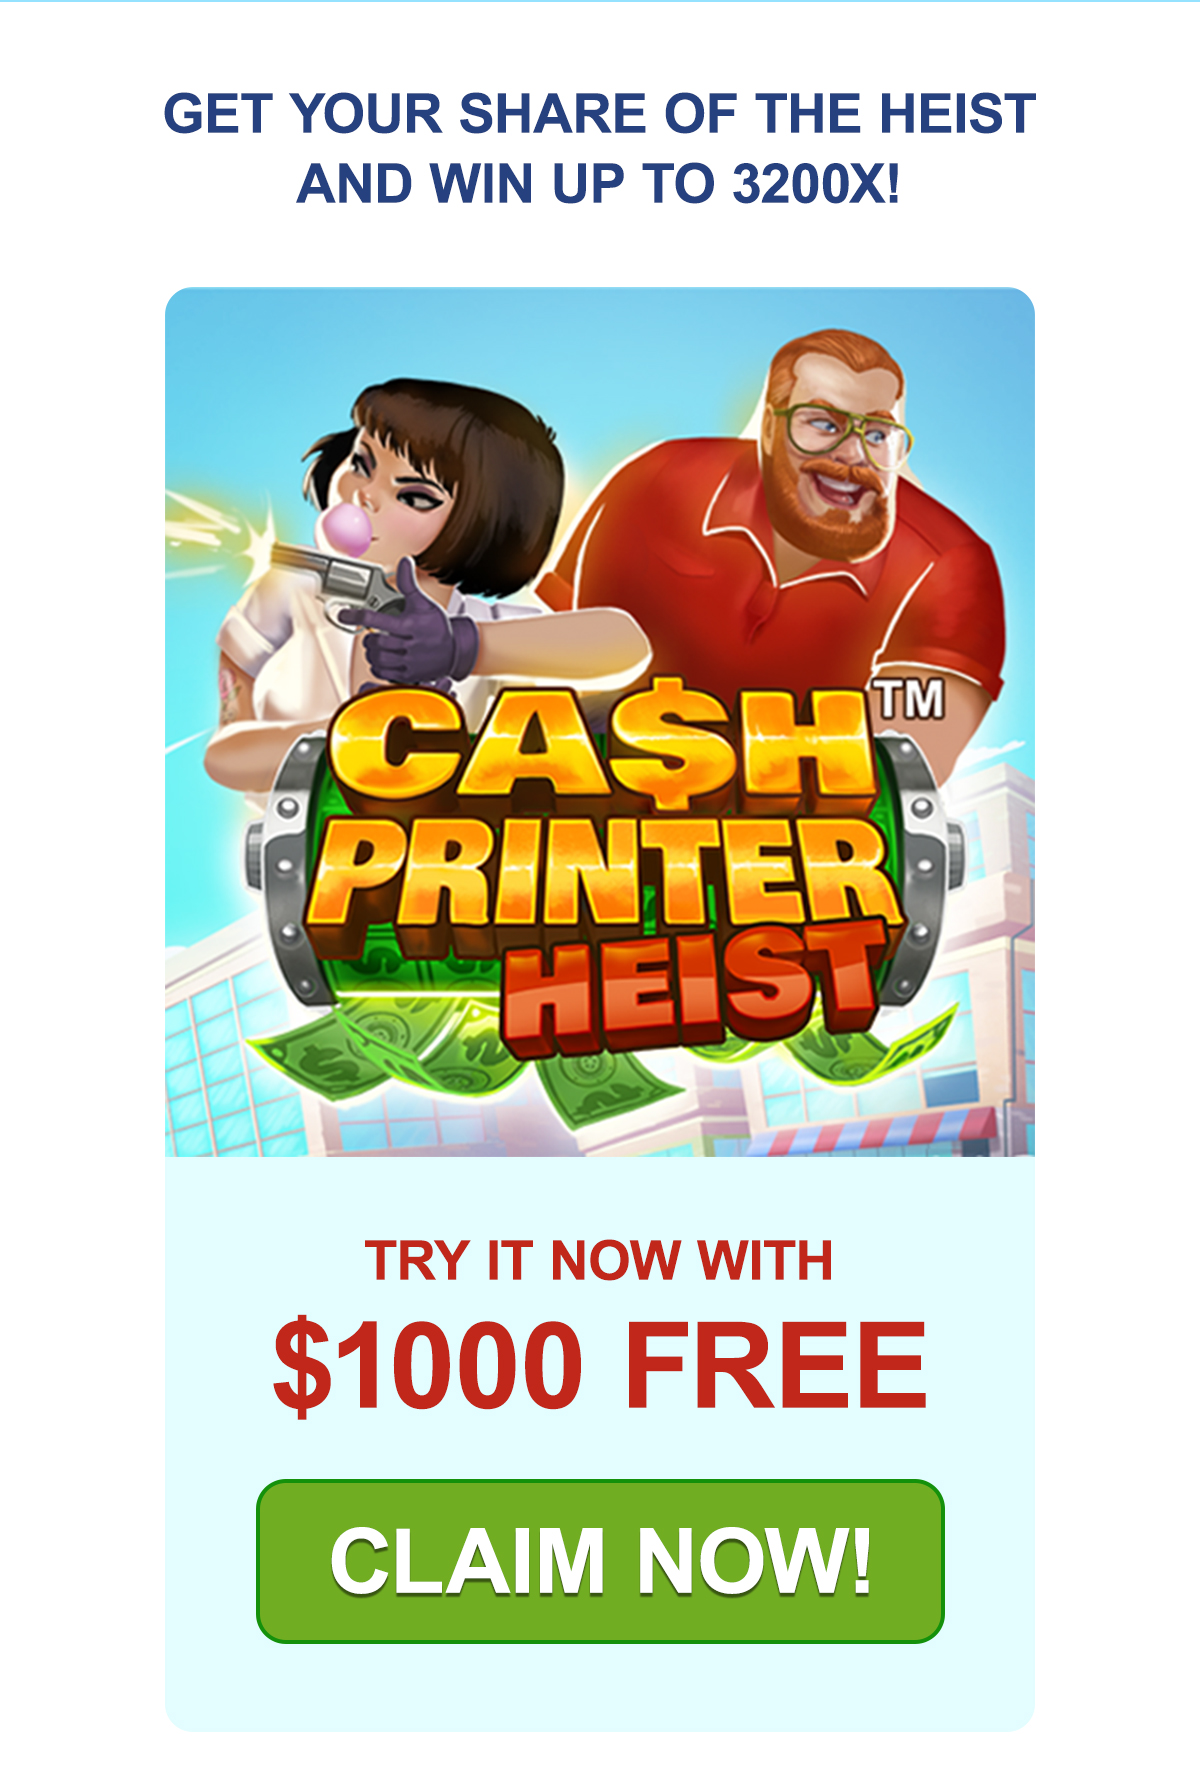 
                                Try it now with $1000 FREE --> Cash Printer Heist™. Turn on your images to see what you’re missing.
                                